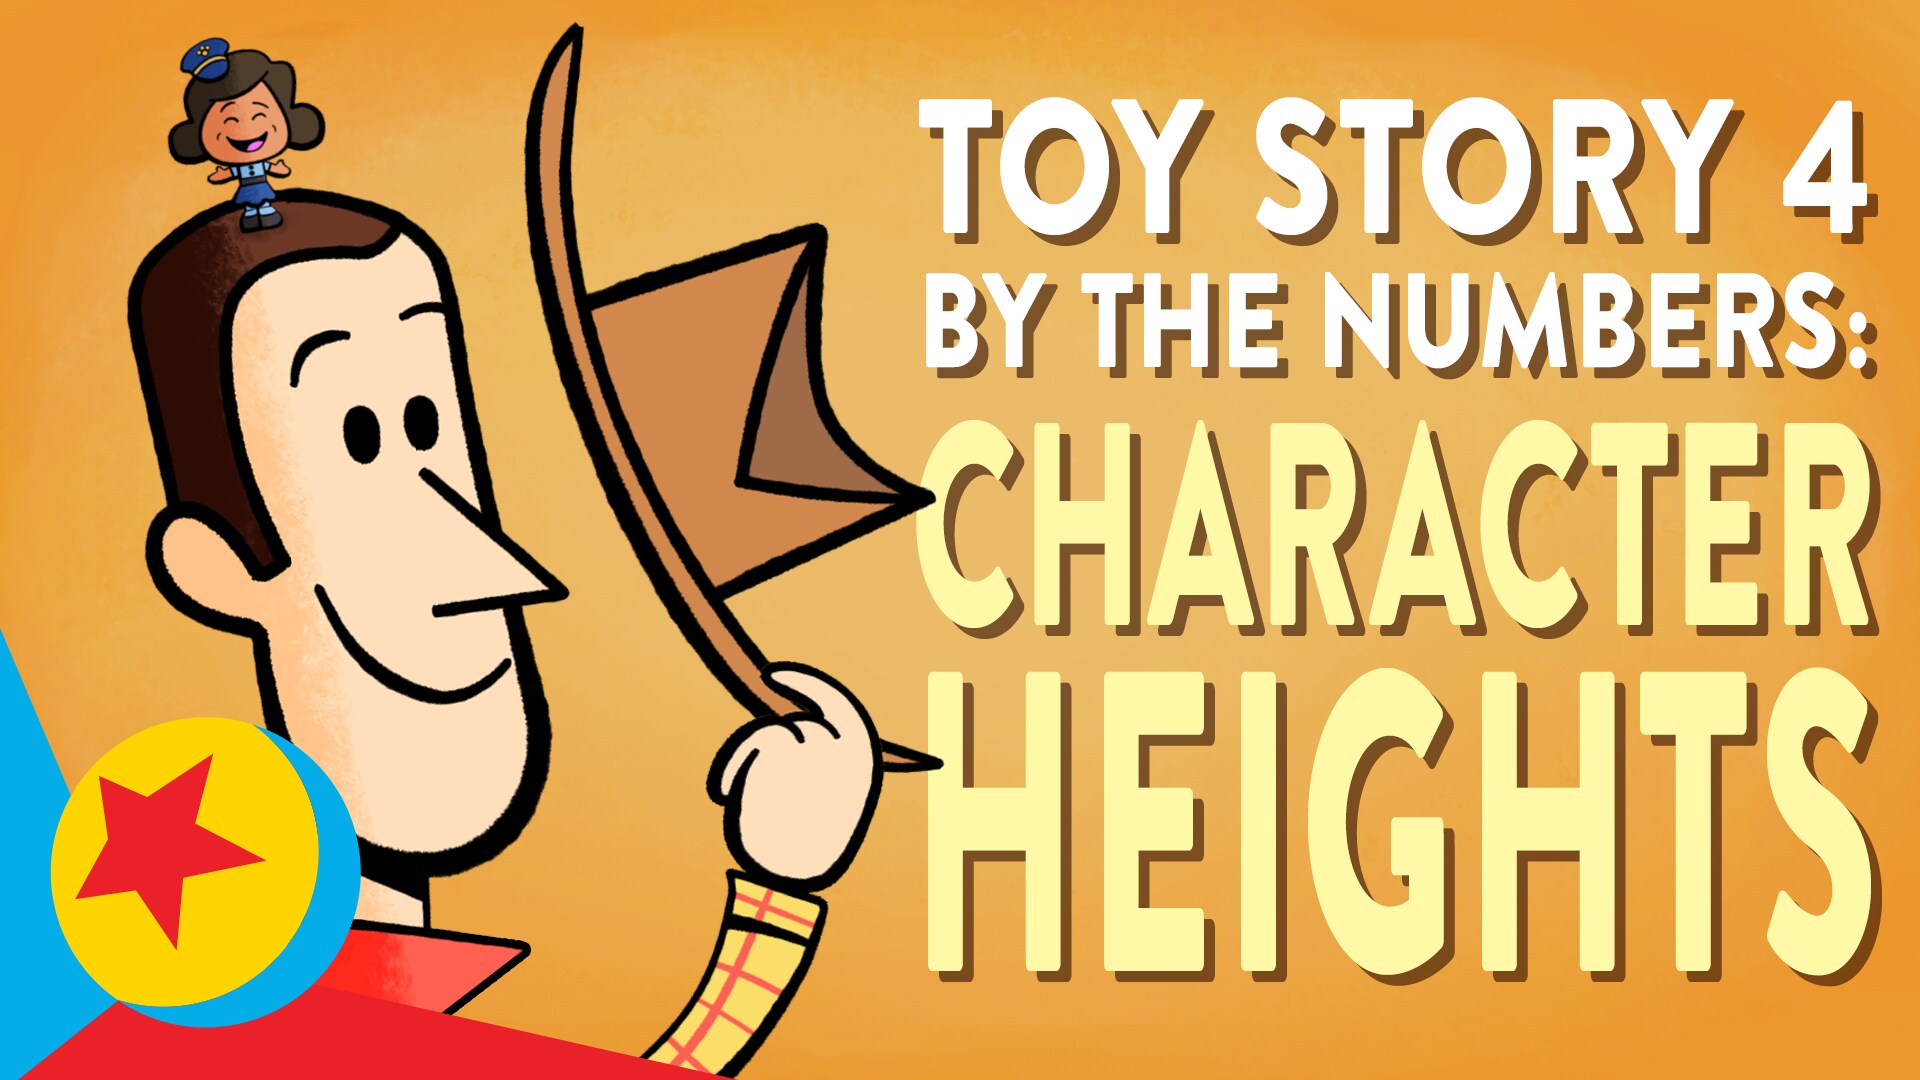 Toy Story 4 Character Heights | Pixar By The Numbers